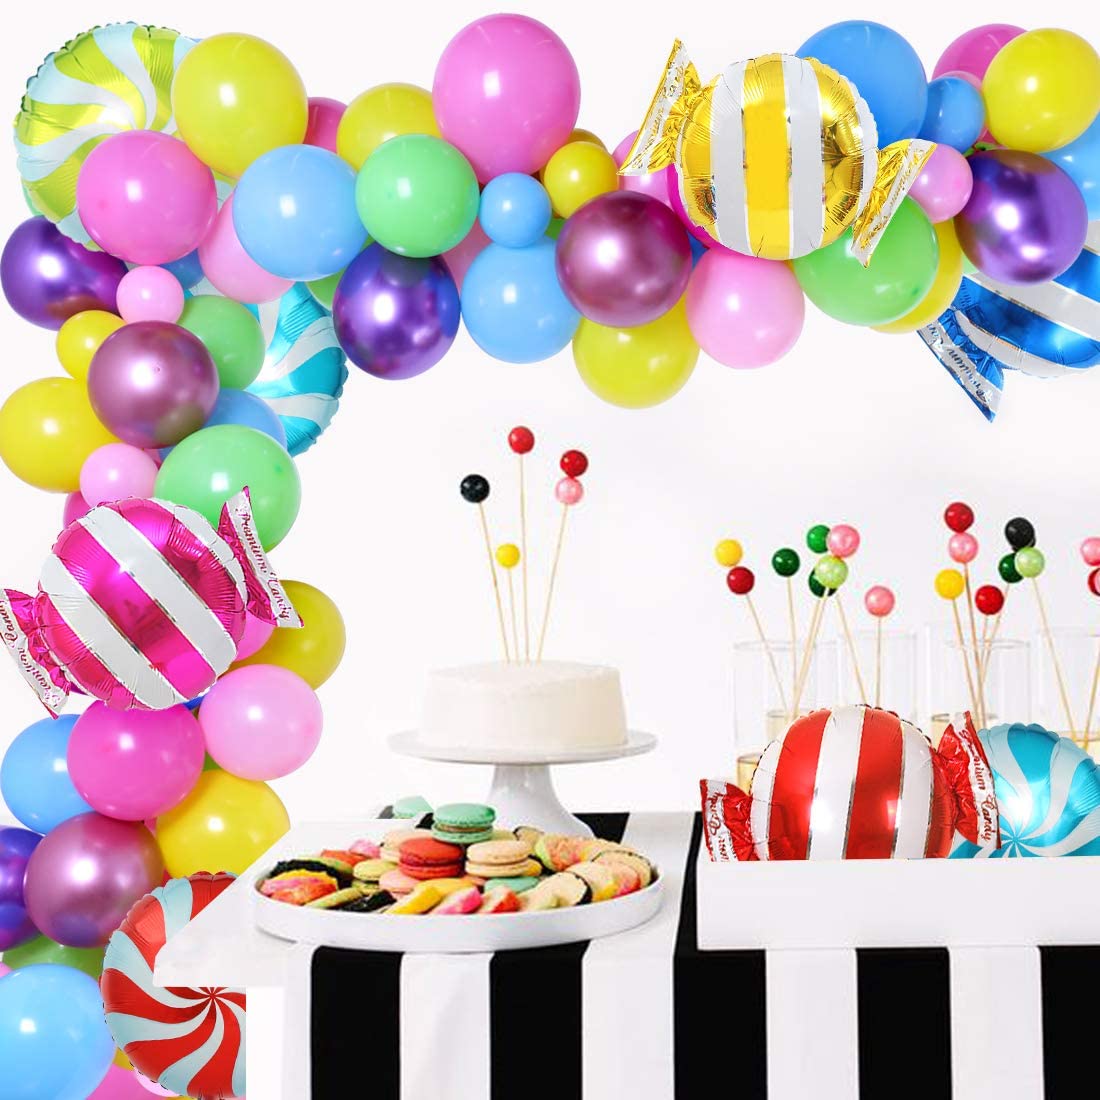 Kesote 23Pcs Sweet Candy Balloons Set Round Lollipop Balloons Candy Land Party Decoration Birthday Balloons Candyland Birthday Party Decoration 18 inches